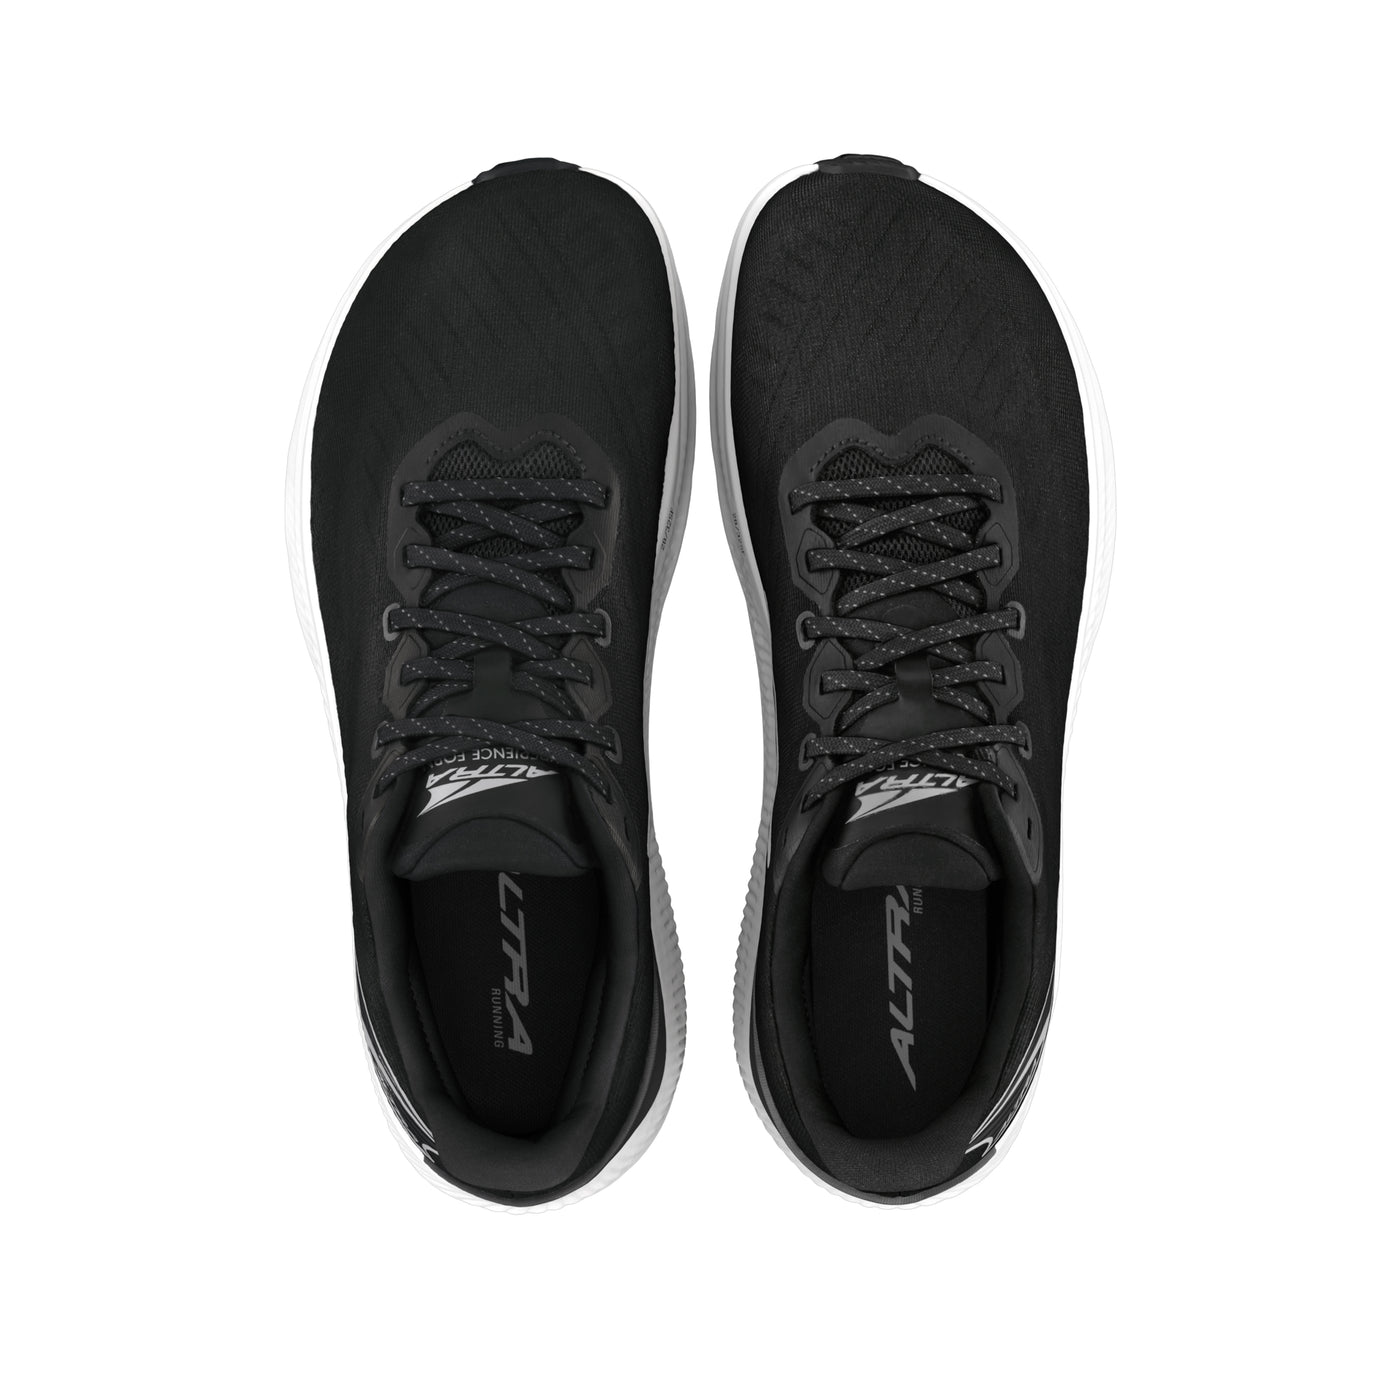 Altra Experience Form men's